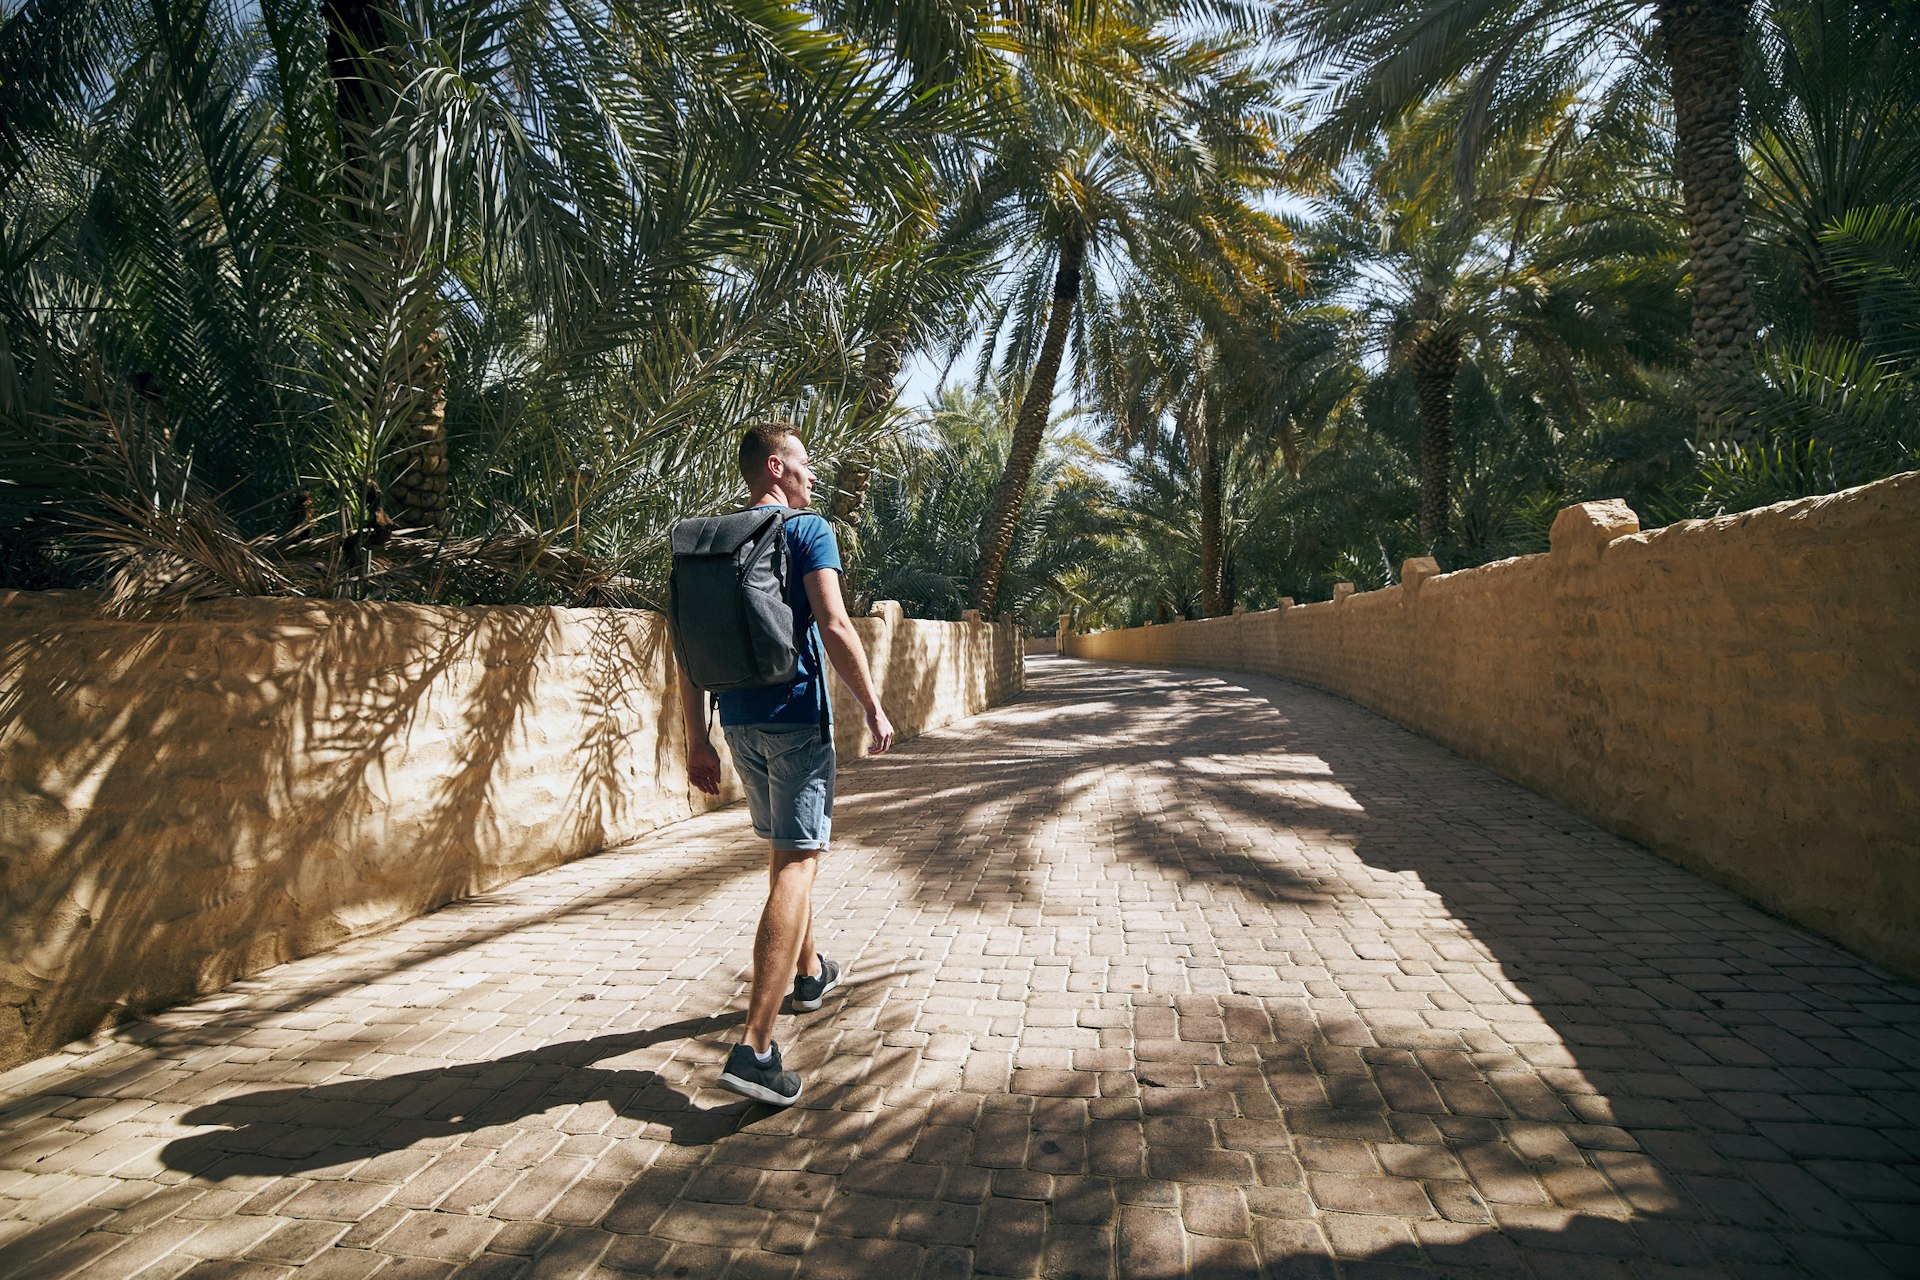 A solo man carrying a backpack walks down a paved path. There are dense areas of palm trees either side of the path